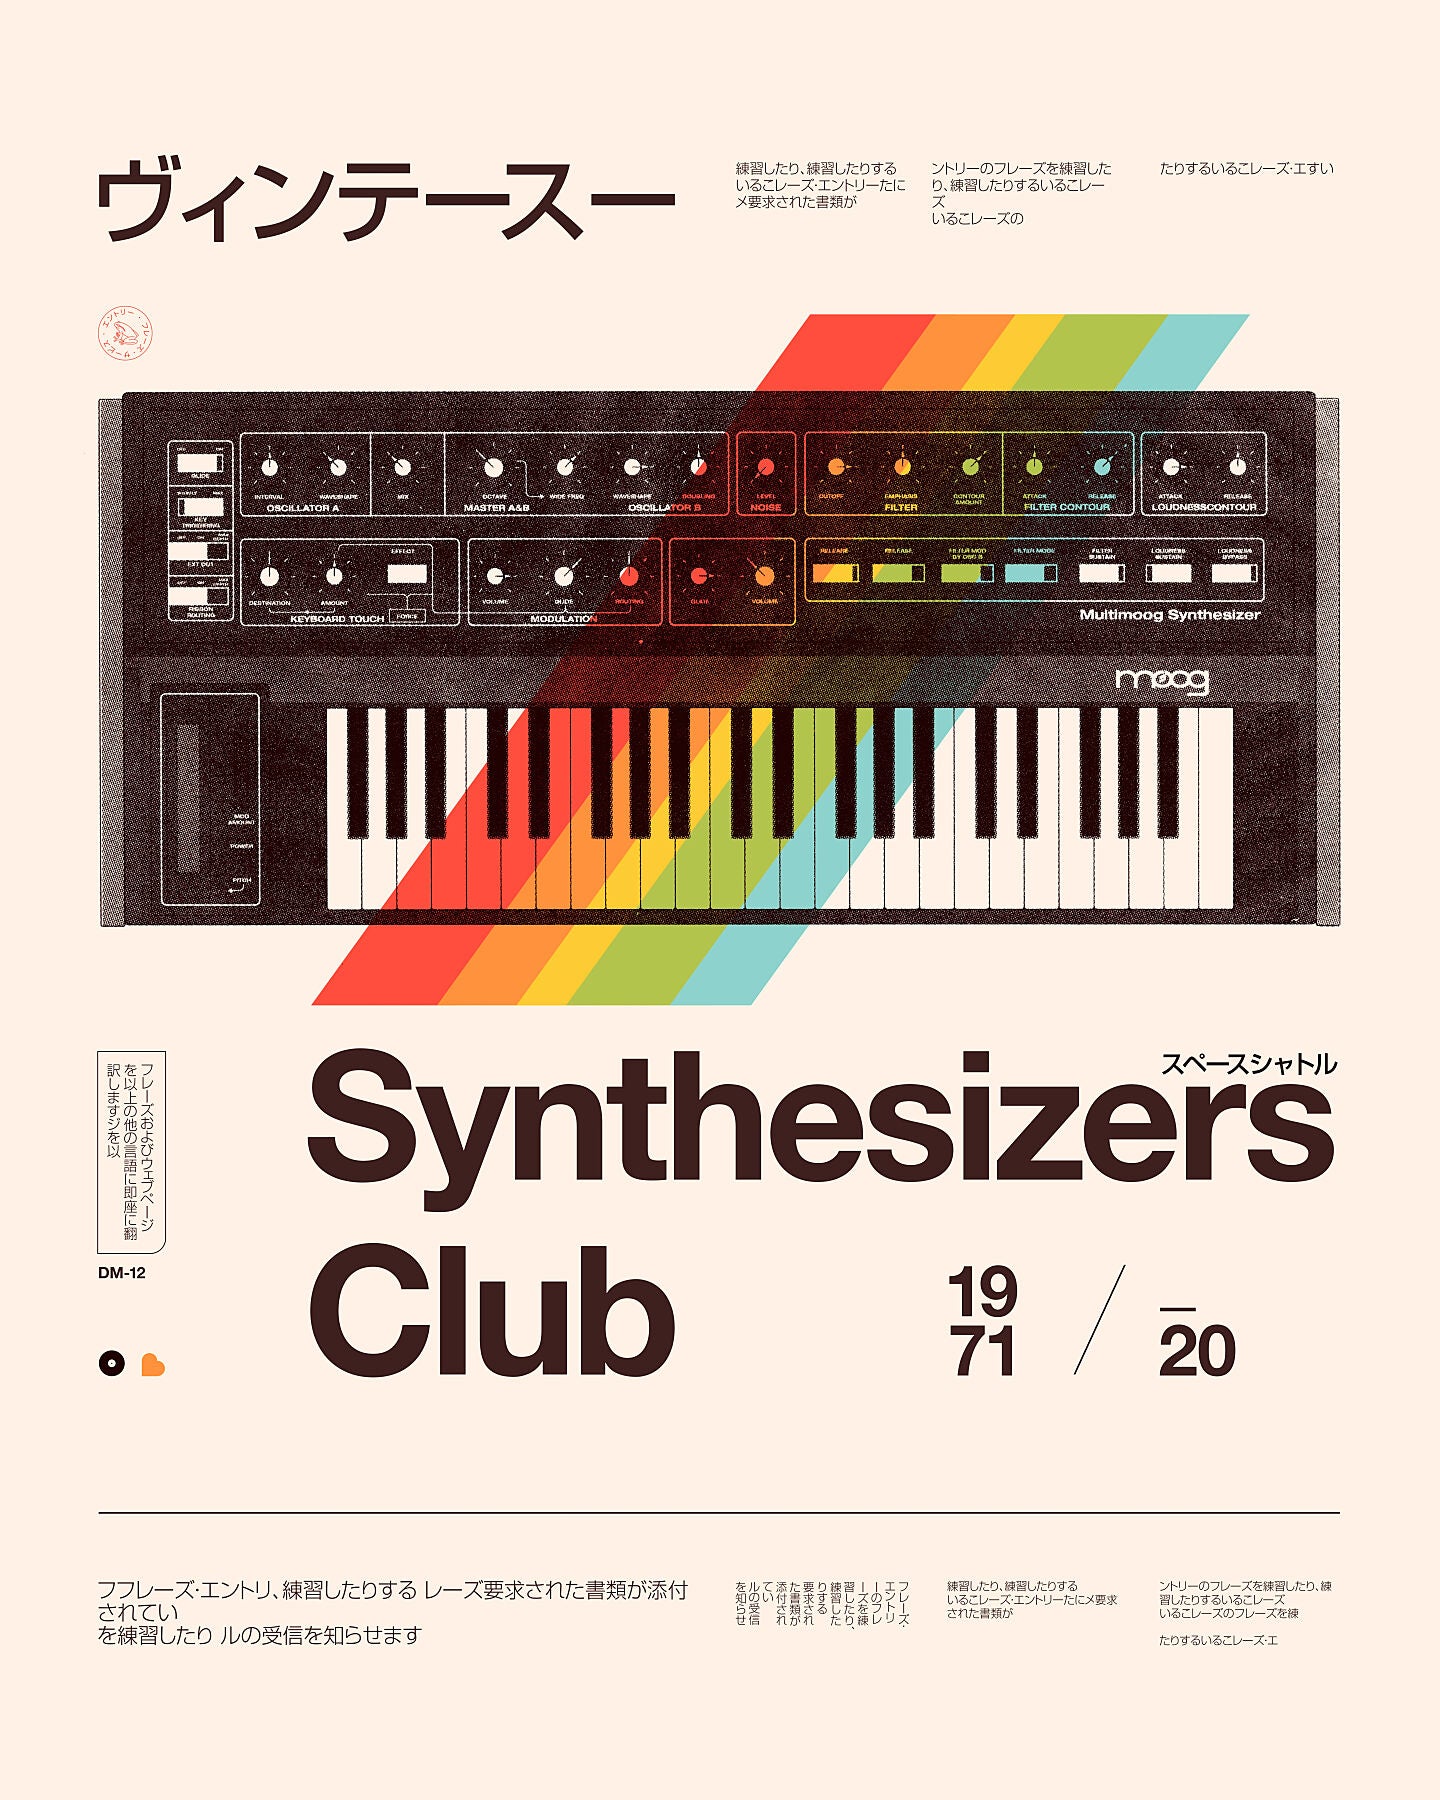 Unframed archival print 'Synthesizers Club, 2020' by Florent Bodart. An analog synthesiser, graced by a rainbow, gleams against a cream backdrop. Japanese and English script add a poster-like allure.